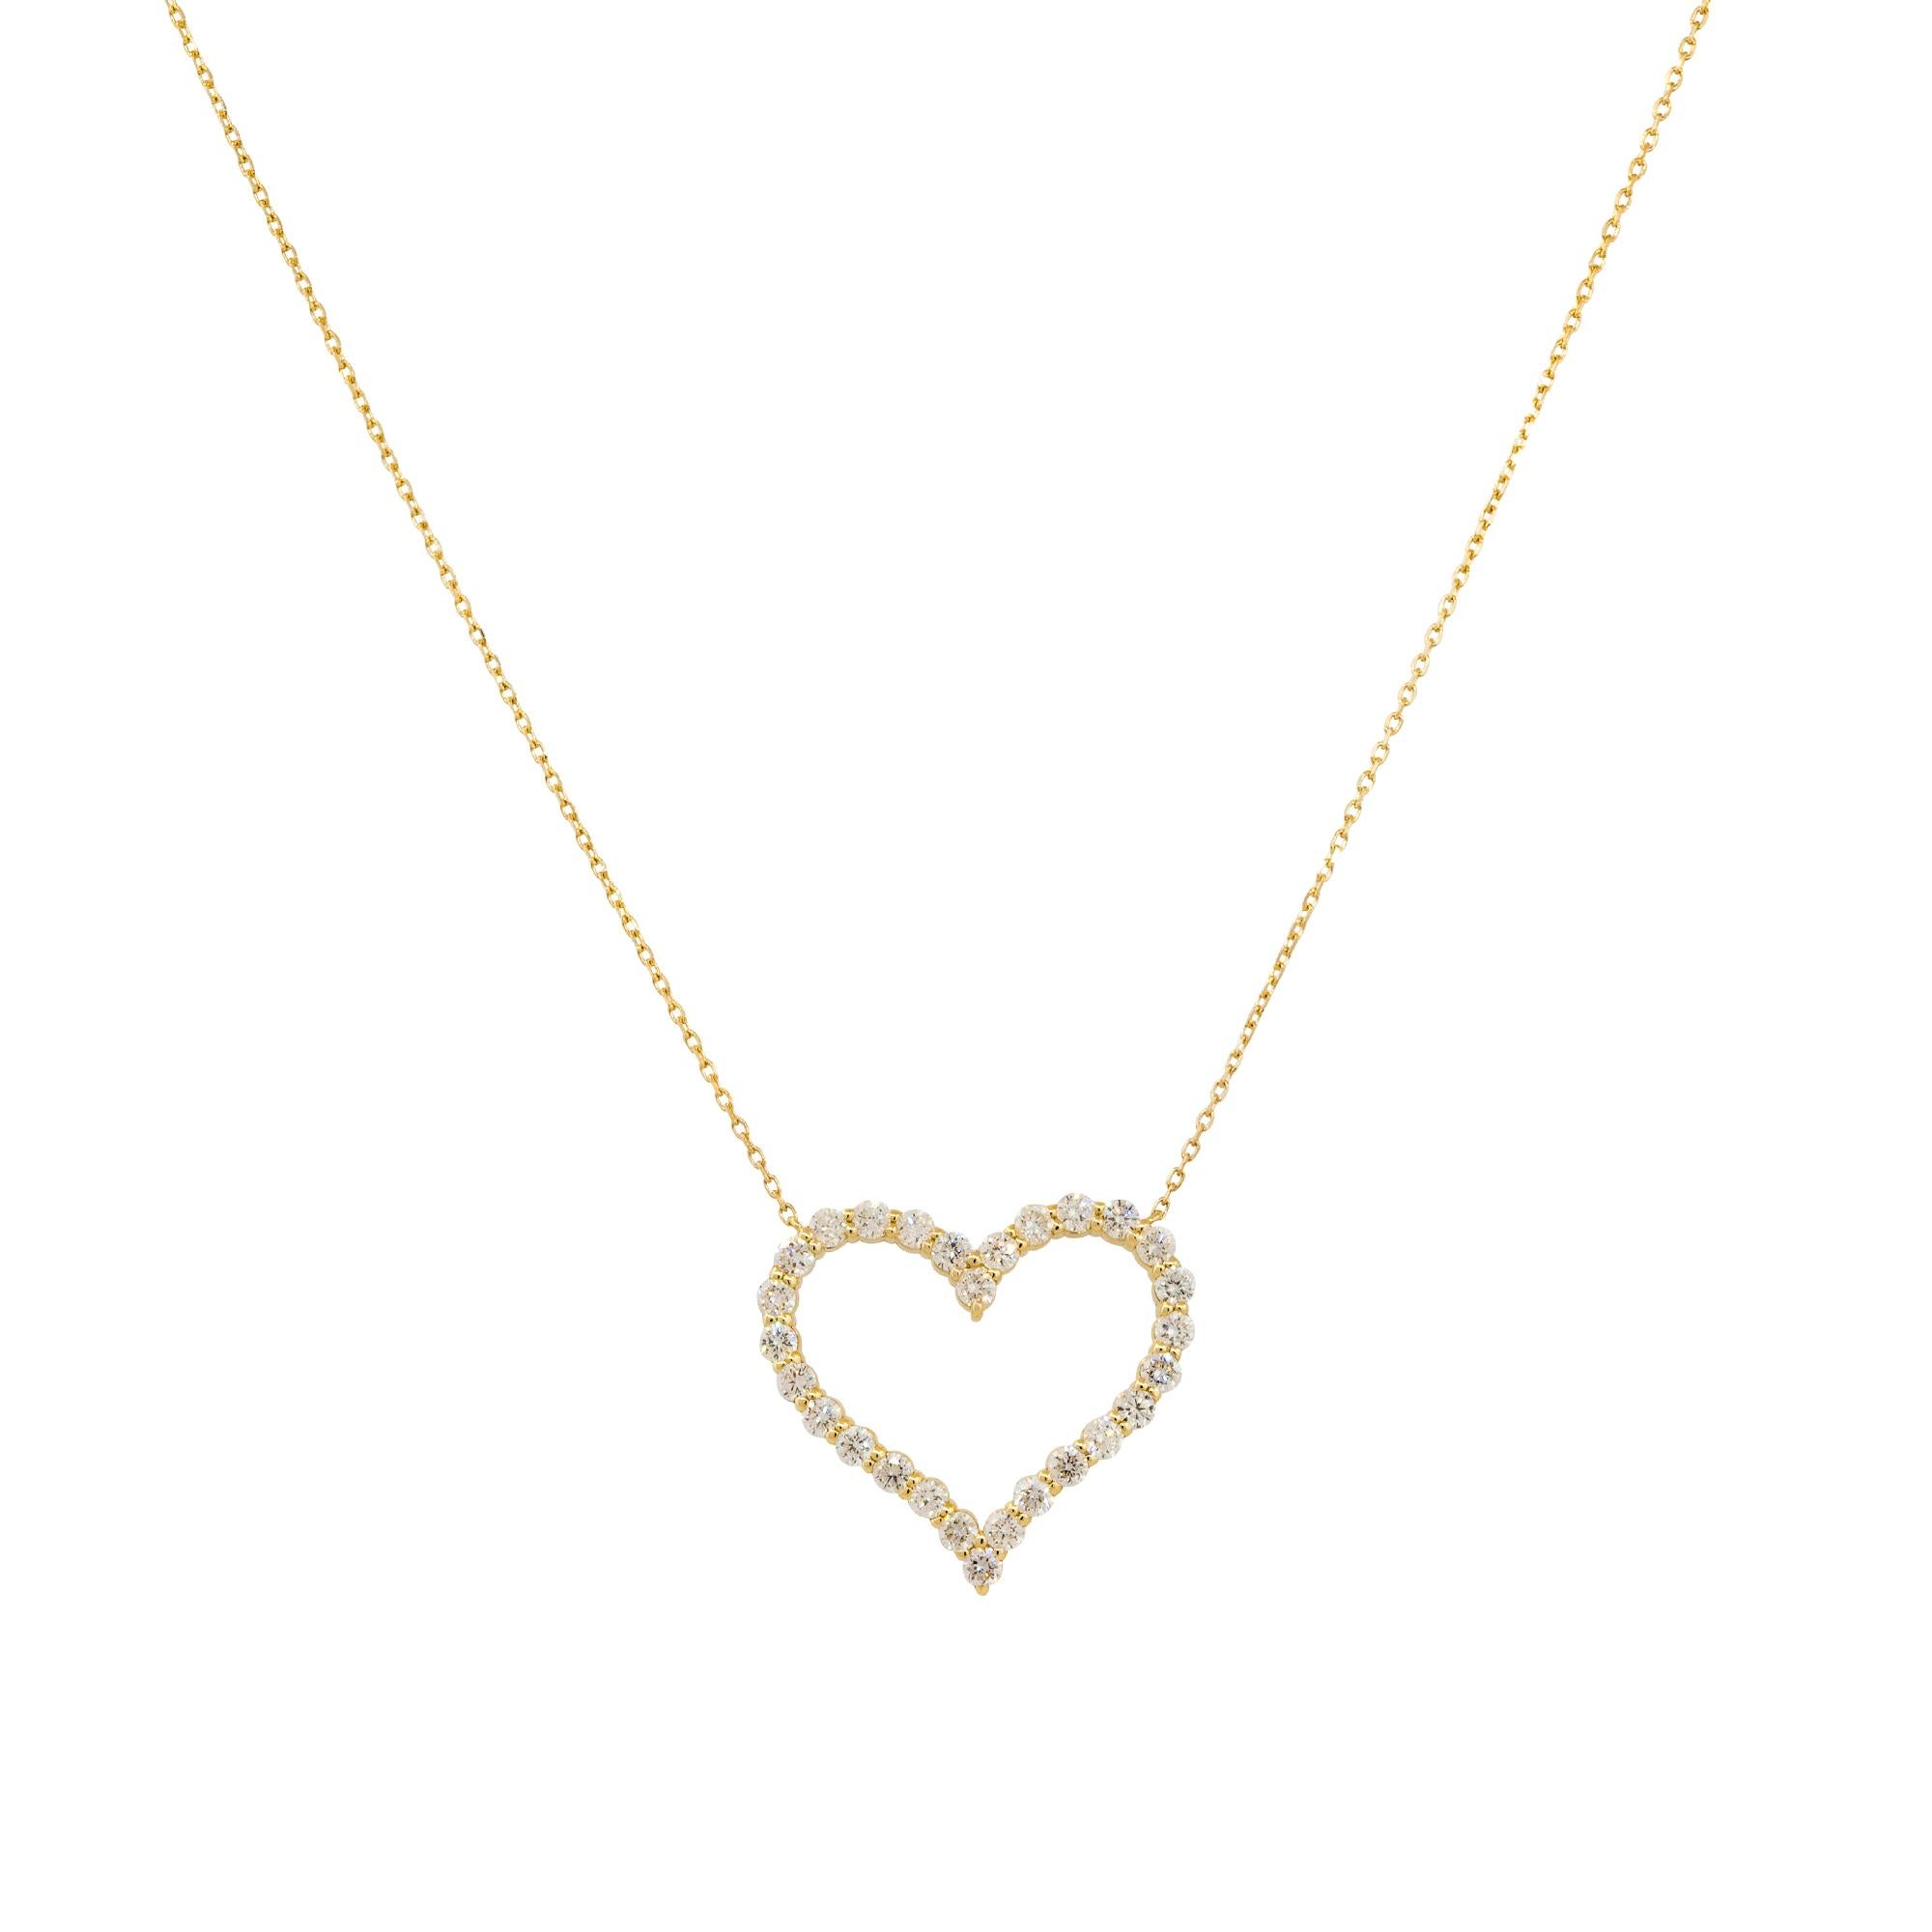 14k Yellow Gold 1.40ctw Open Heart Diamond Necklace

Material: 14k Yellow Gold
Diamond Details: Approximately 1.40ctw of Round Diamonds. There are 28 Diamonds total
Measurements: Necklace Measures 16.5″ in Length
Fastening: Spring Ring Clasp
Item